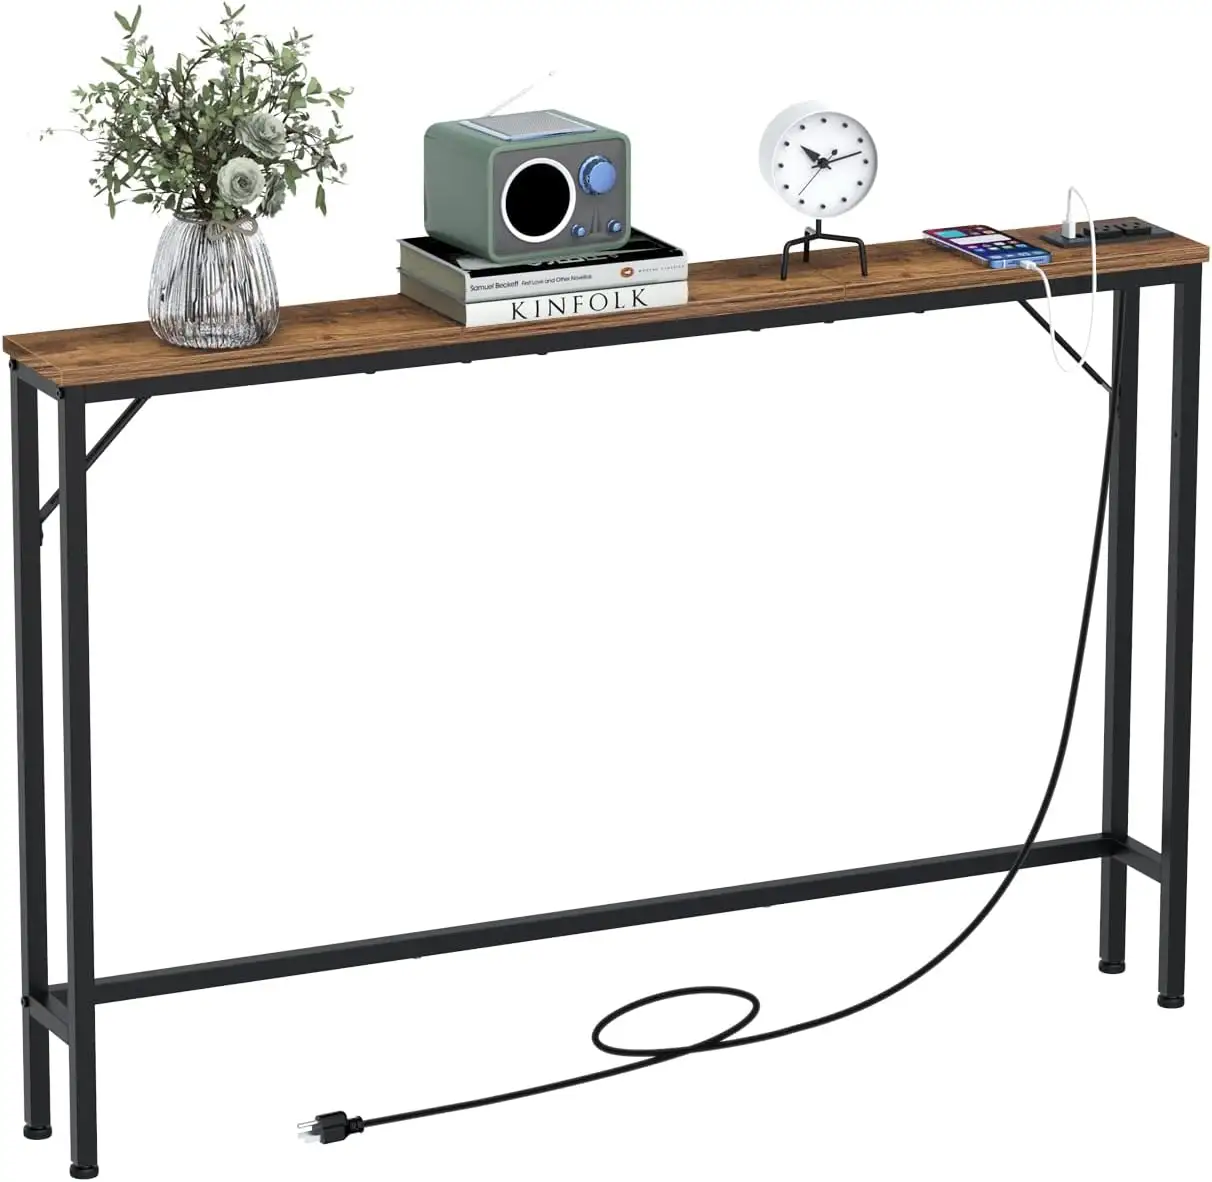 Fashion items Simple metal frame wood tabletop behind sofa side table wall shelves can be easily moved decorative shelves